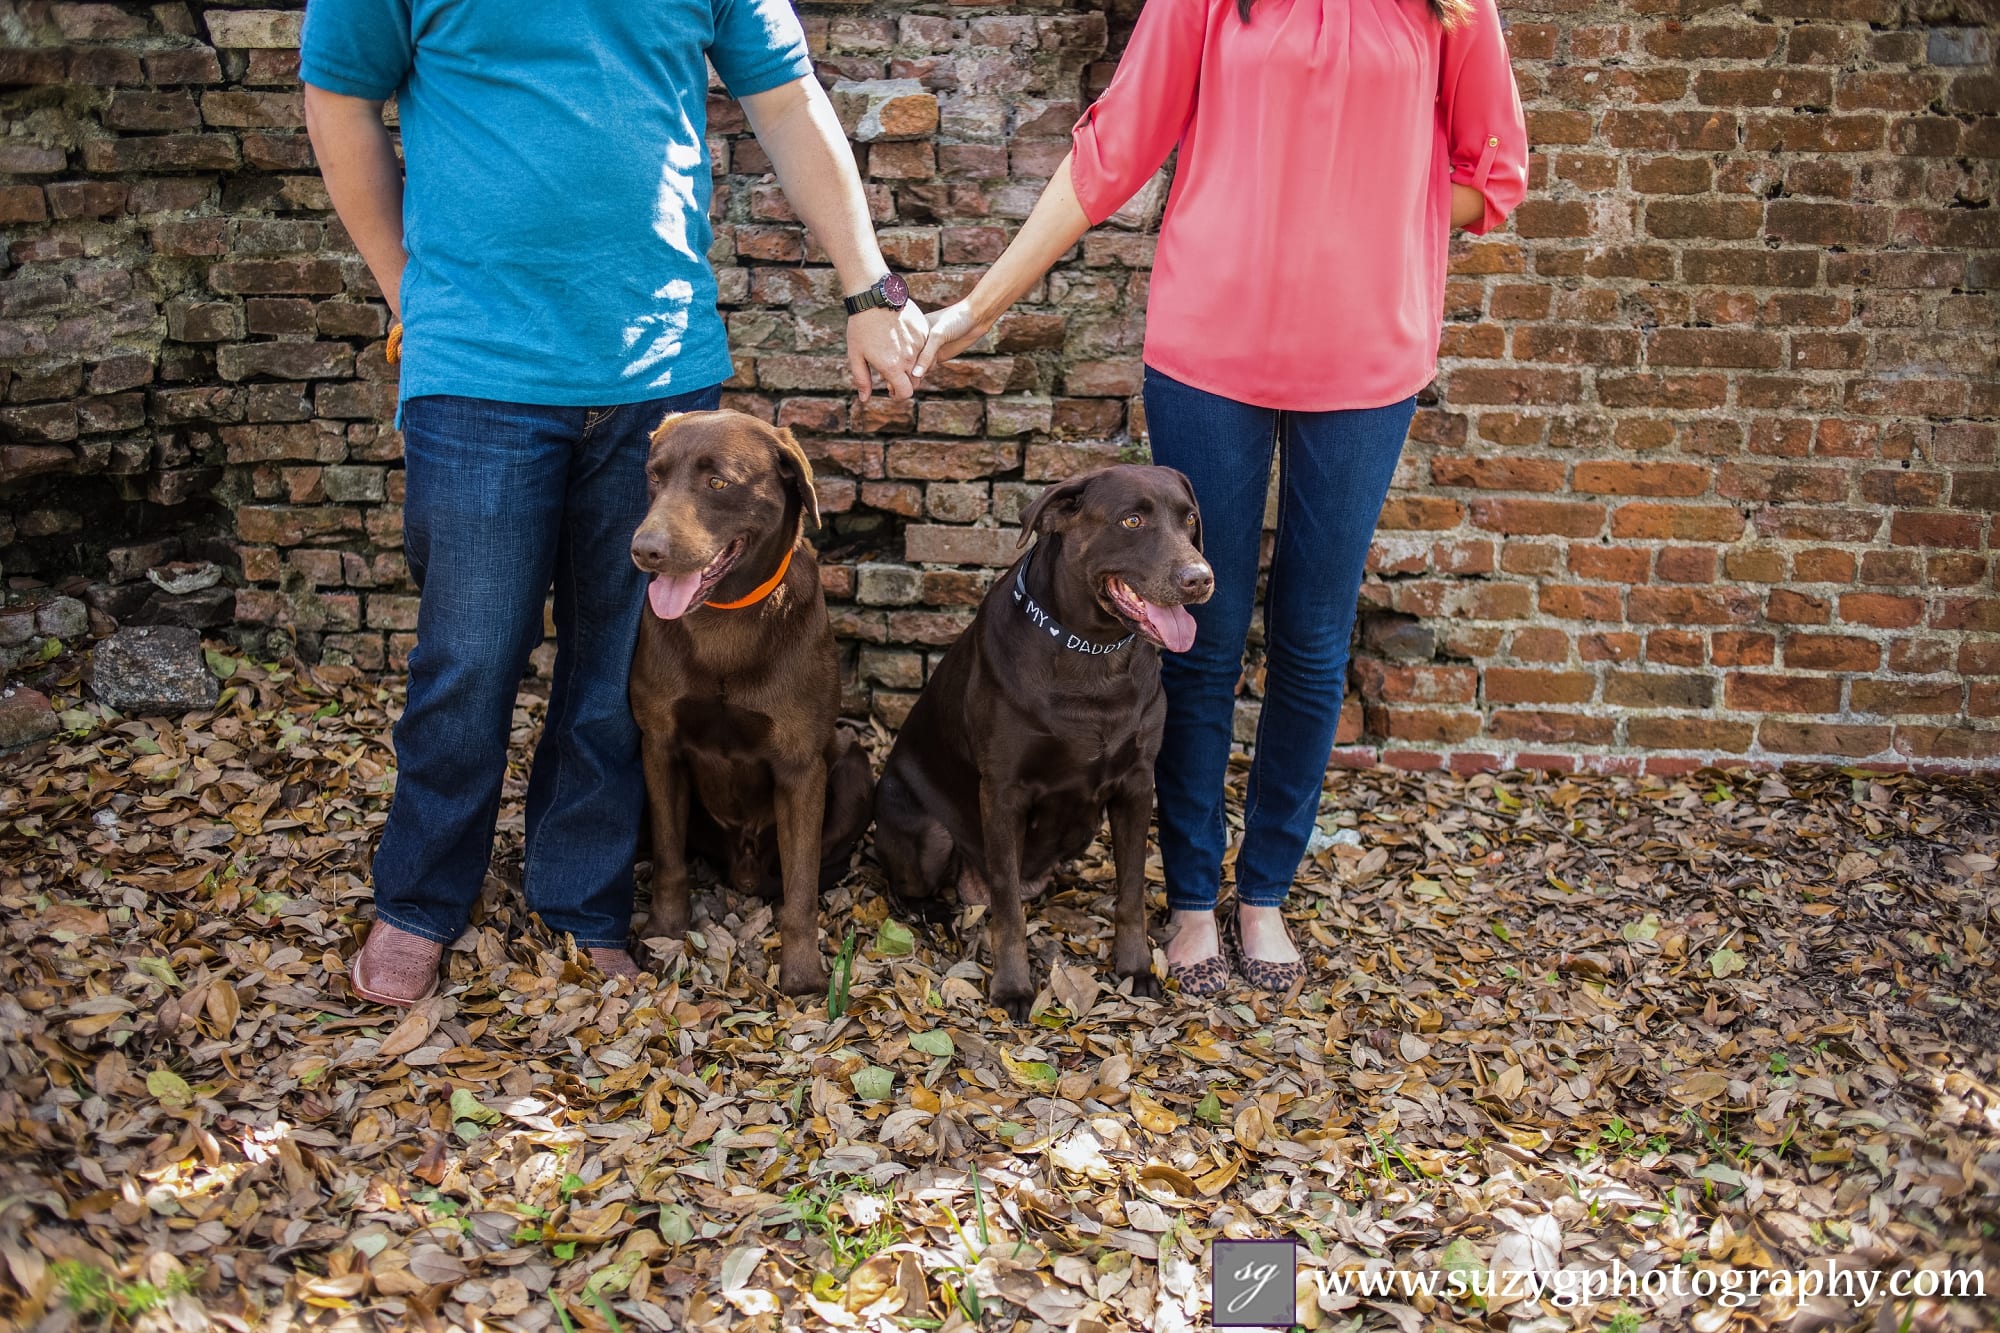 engagement photography-new orleans engagement photography-louisiana wedding photographer-wedding photography-suzy-g-photography-weddings_0001